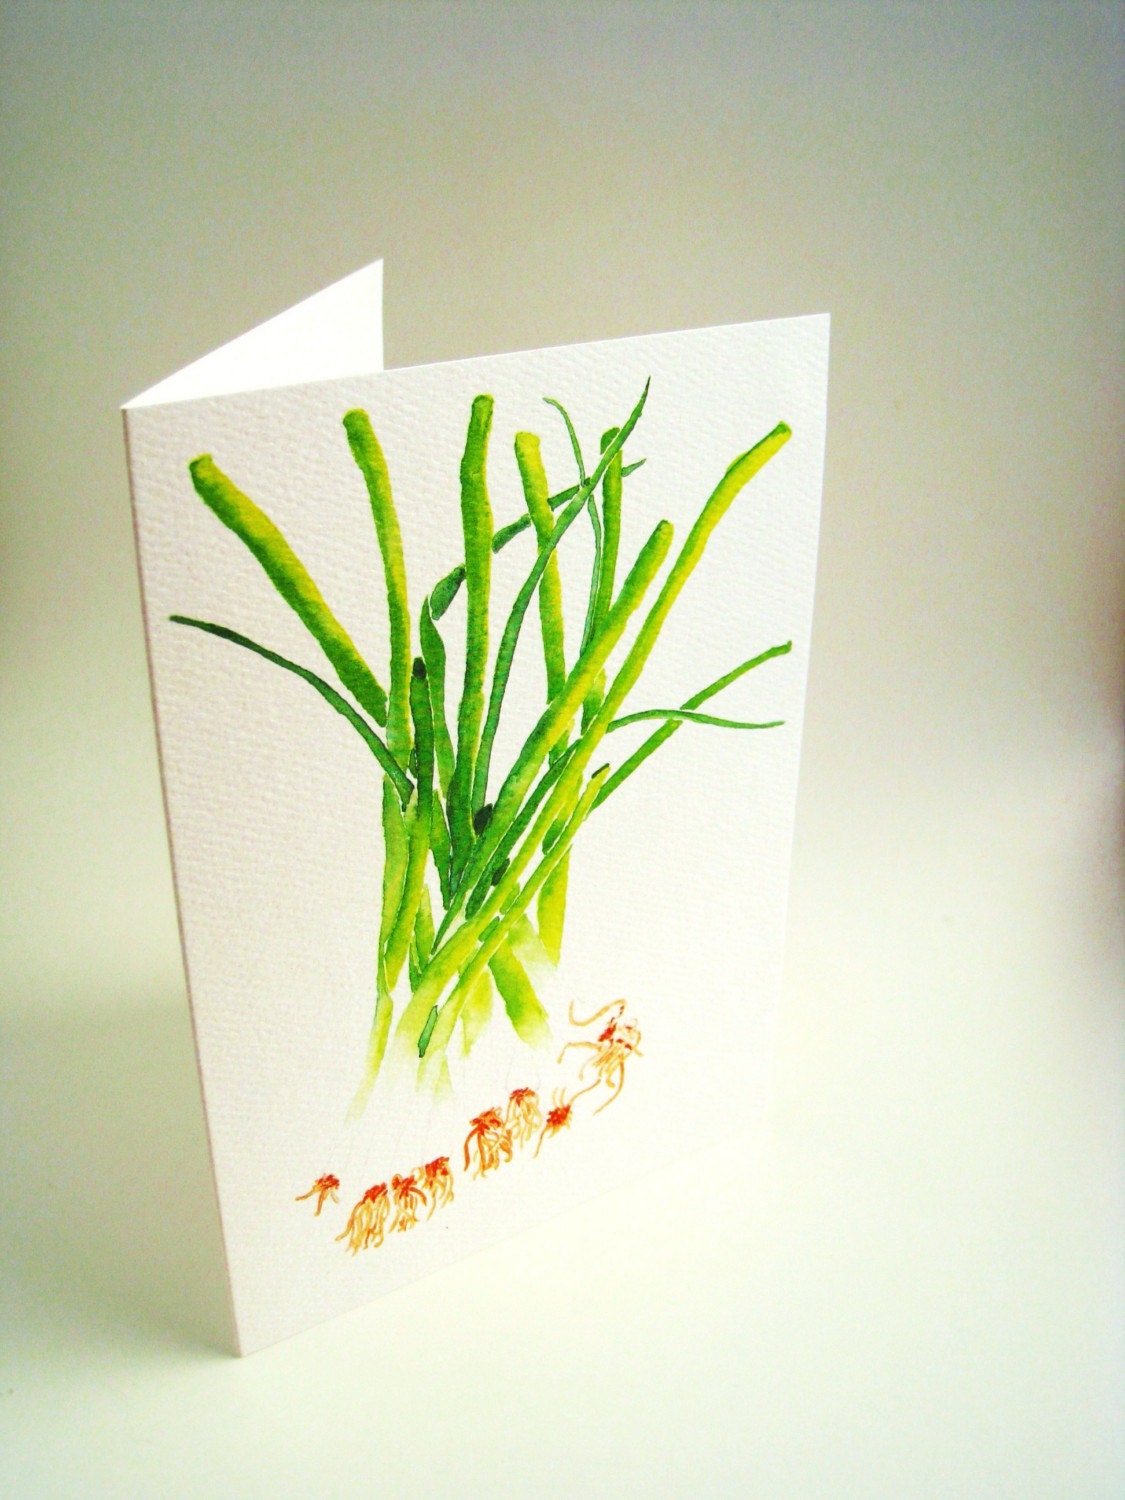 Green onion herd, set of 5 cards with envelopes